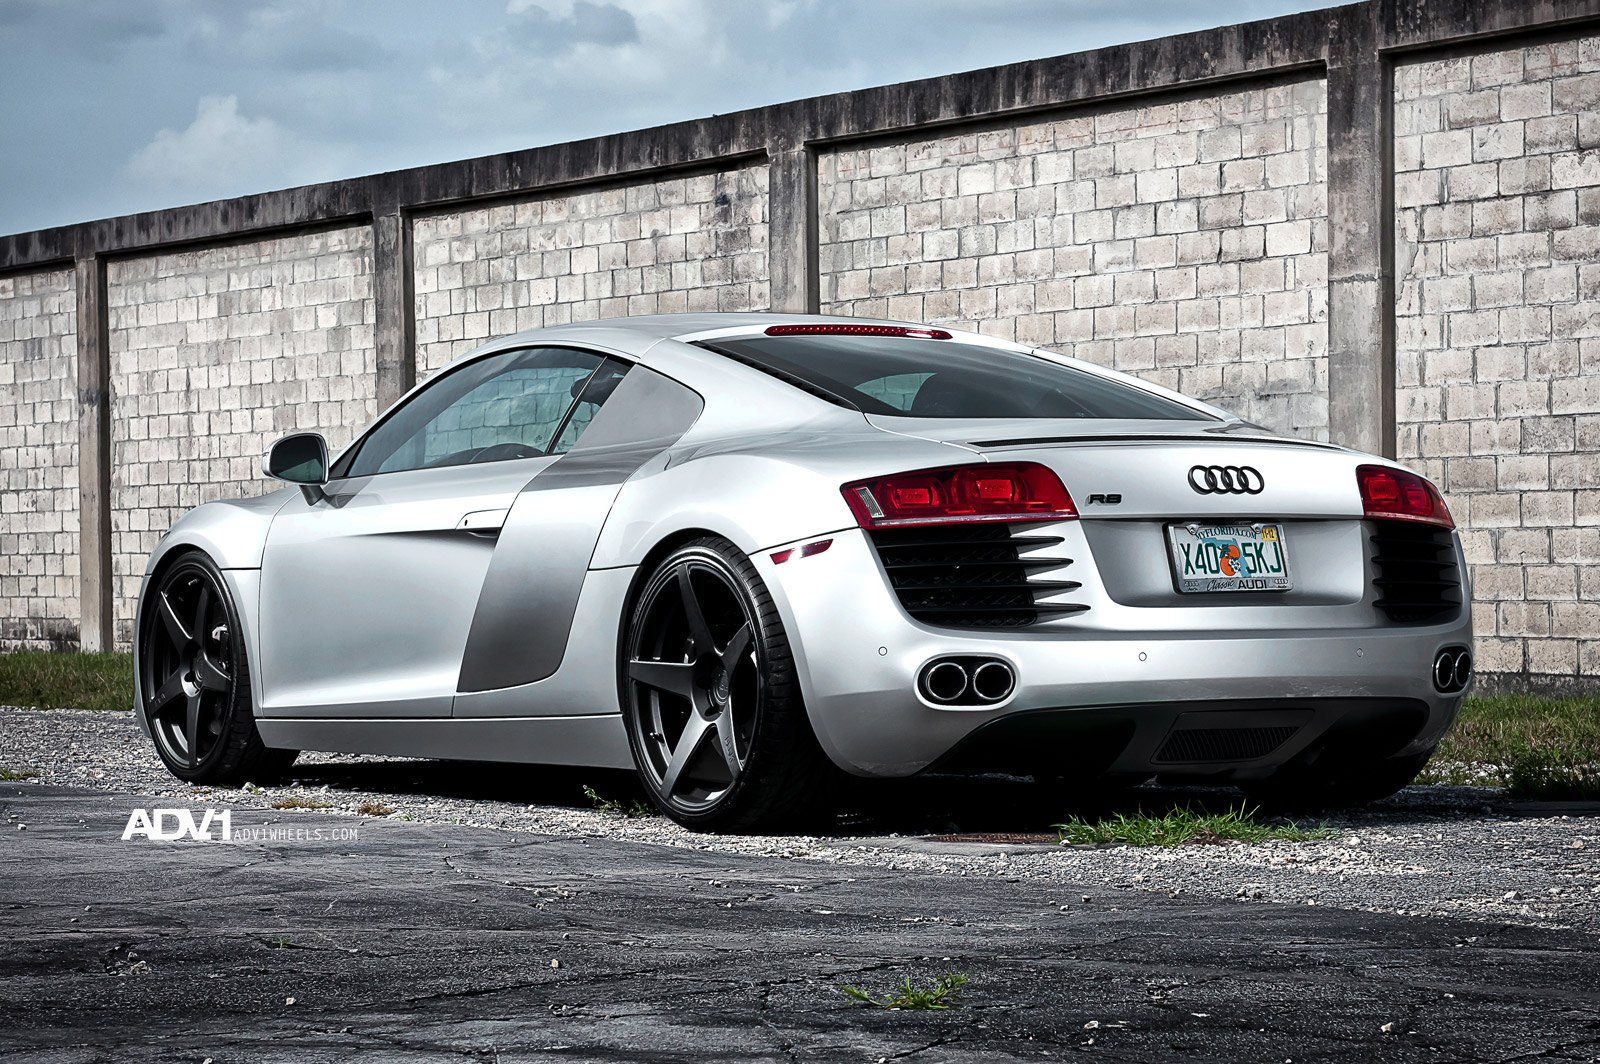 Aftermarket Rear Diffuser on Silver Audi R8 - Photo by ADV.1